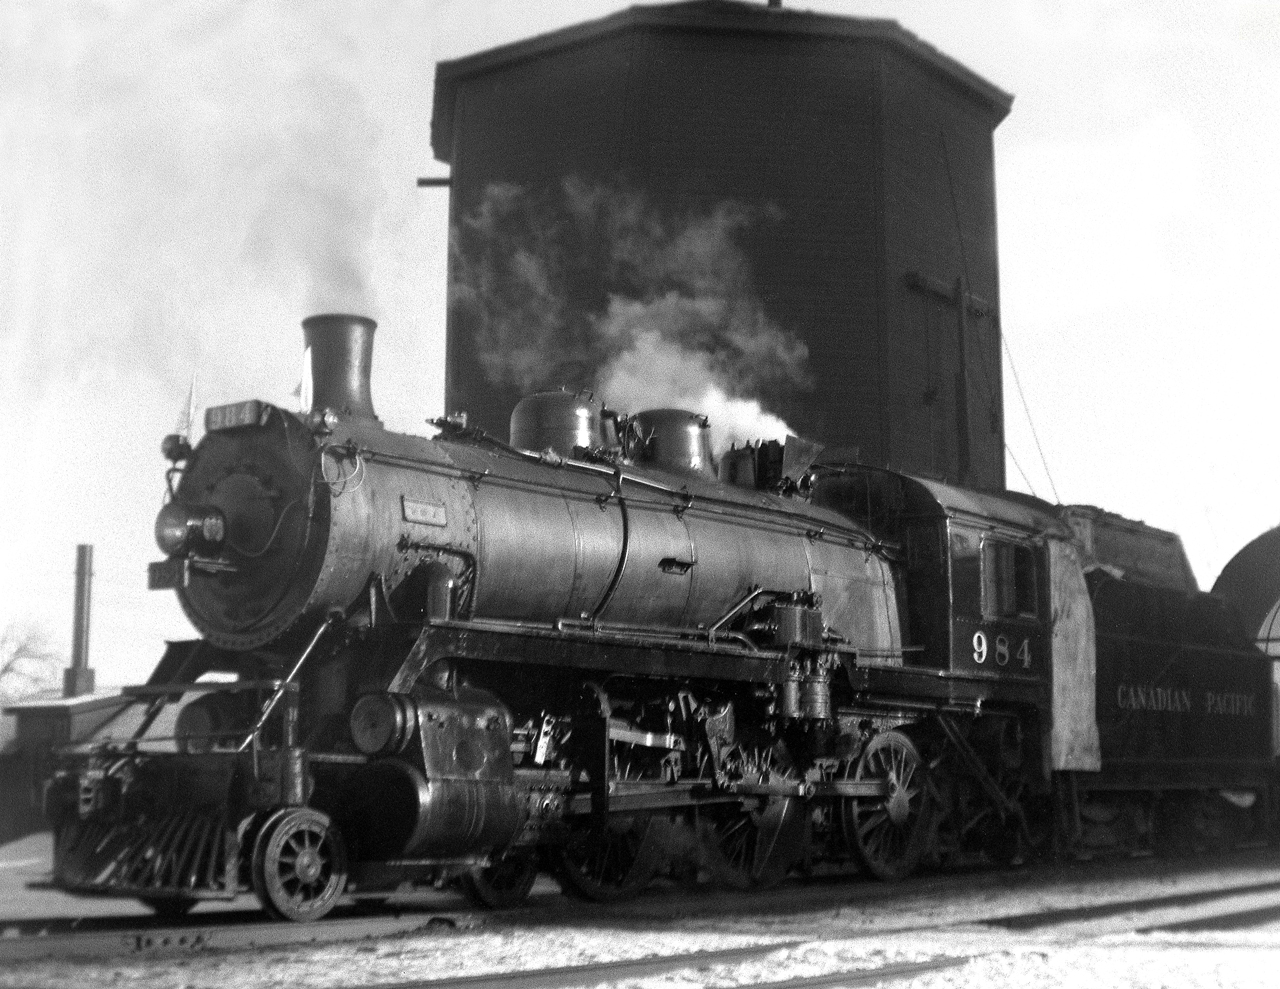 During visits to my grandmother on the CP main,as a 9 year old with a Kodak Brownie camera,I gravitated down to the station and photographed everything that would show up. In this shot an ubiquitous D-10 4-6-0 on a westbound Hi-Wide special pulls up to the water tank west of the station